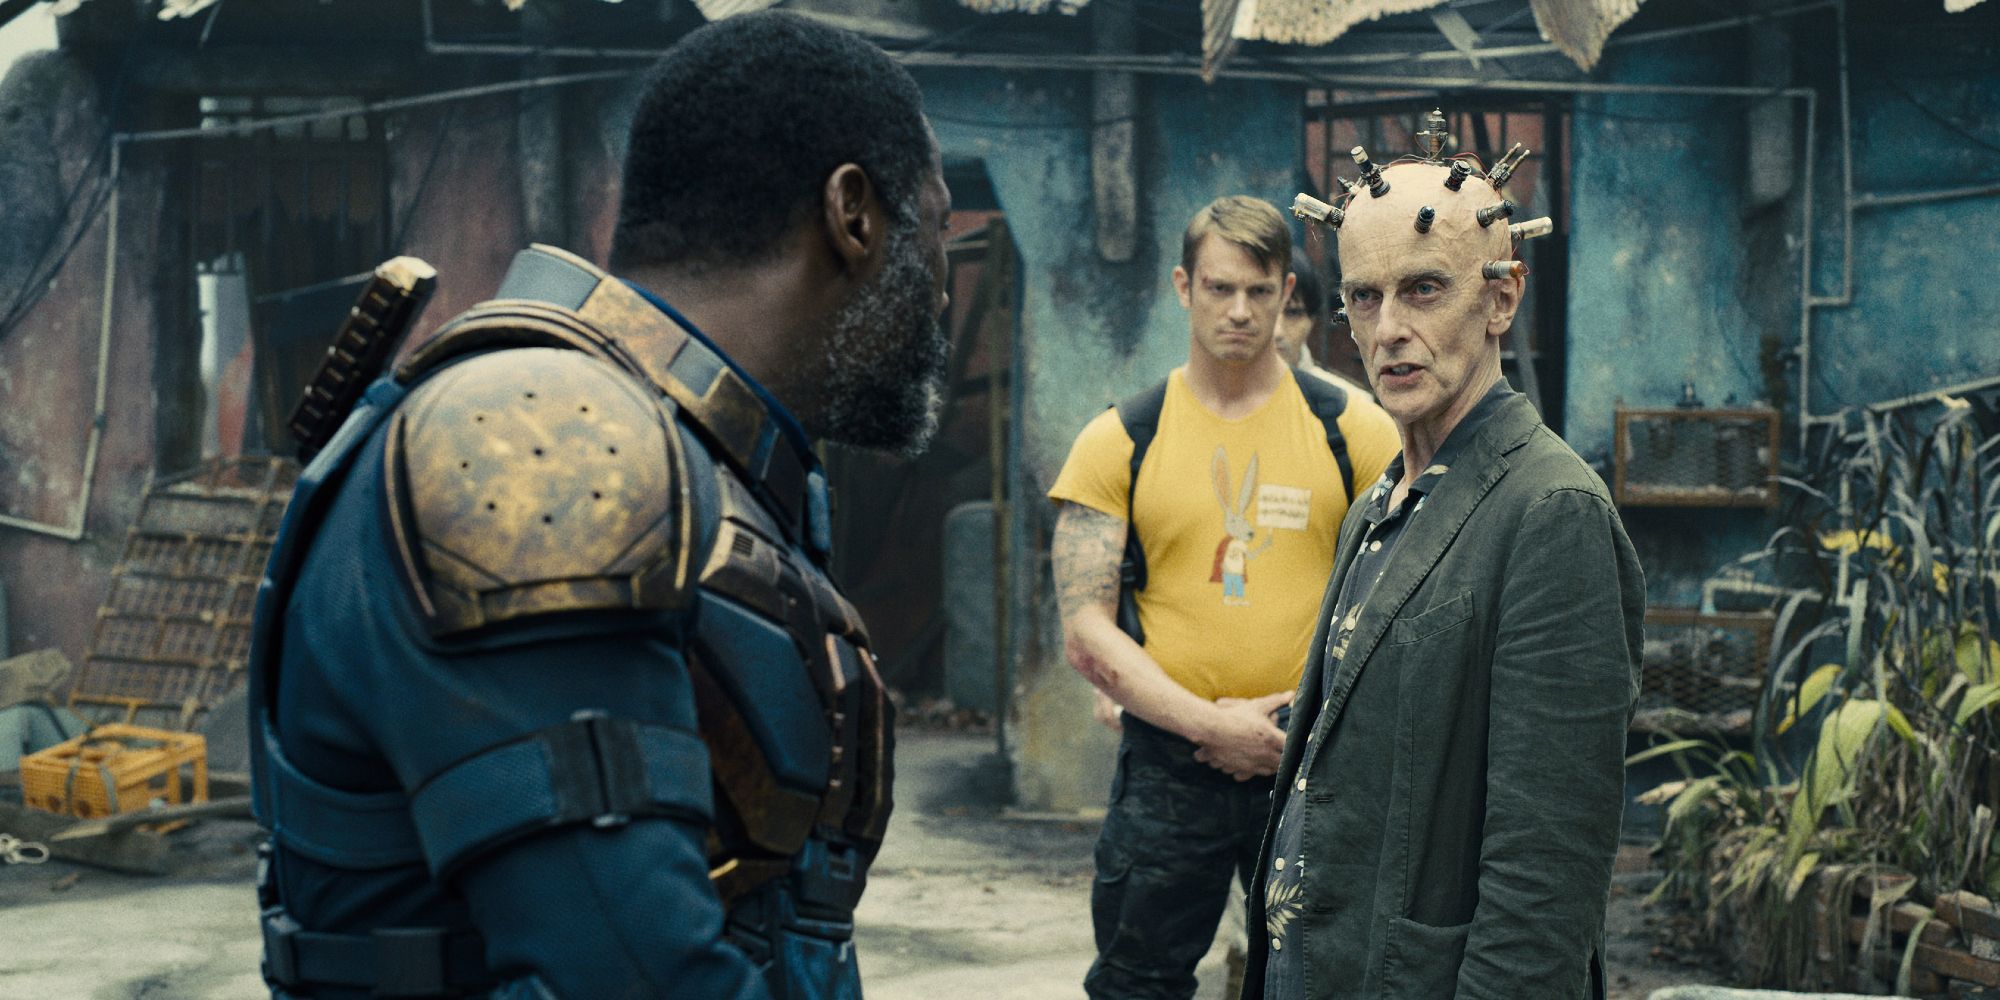 Idris Elba as Bloodsport and Peter Capaldi as The Thinker in The Suicide Squad